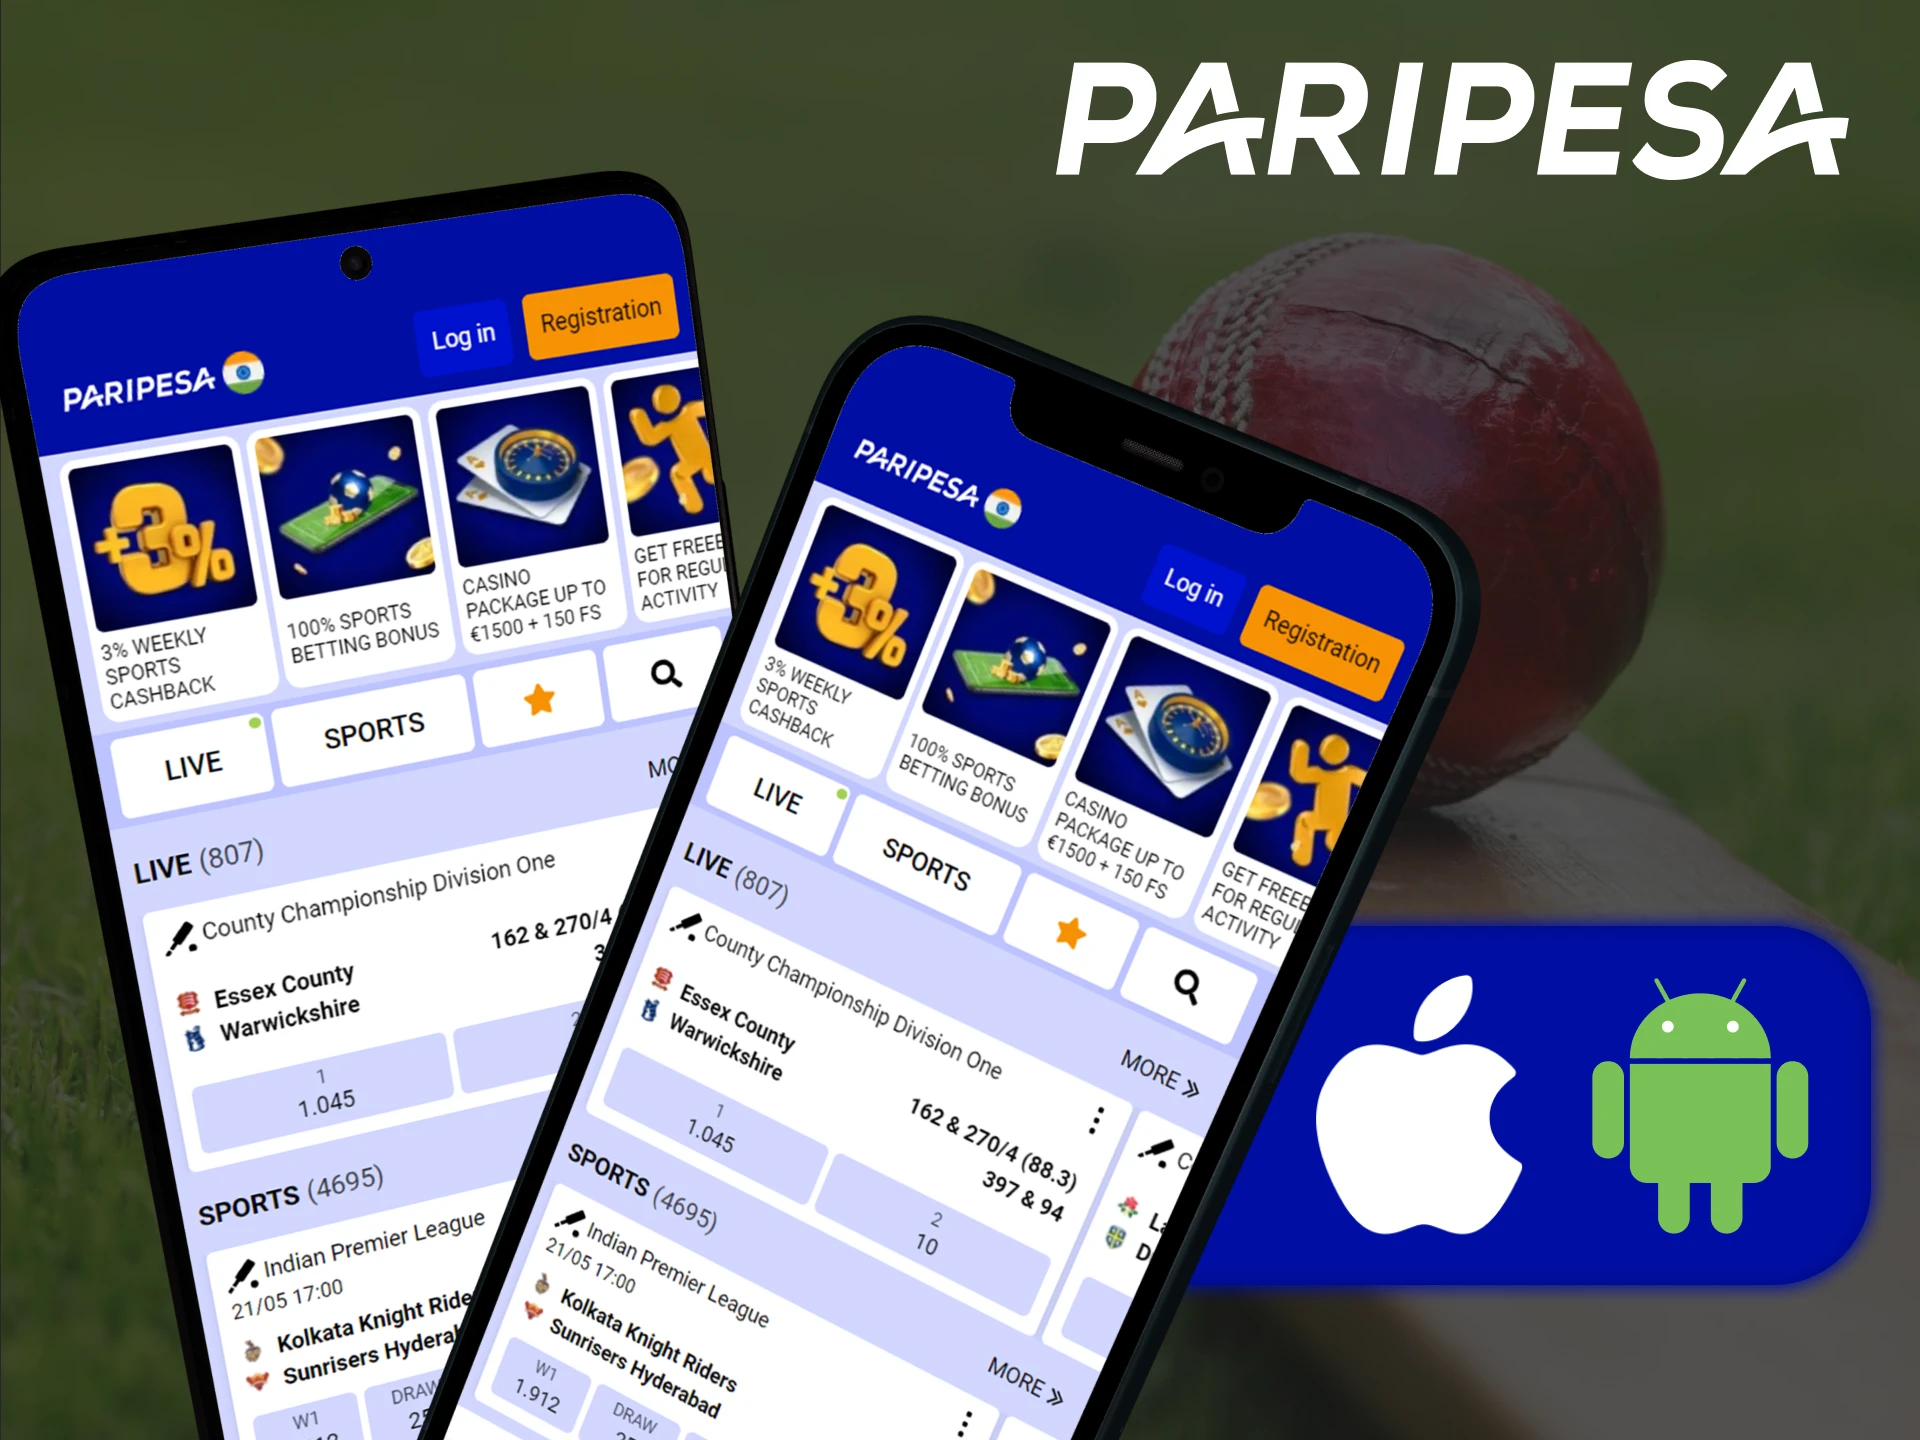 Download the Paripesa mobile app for free.